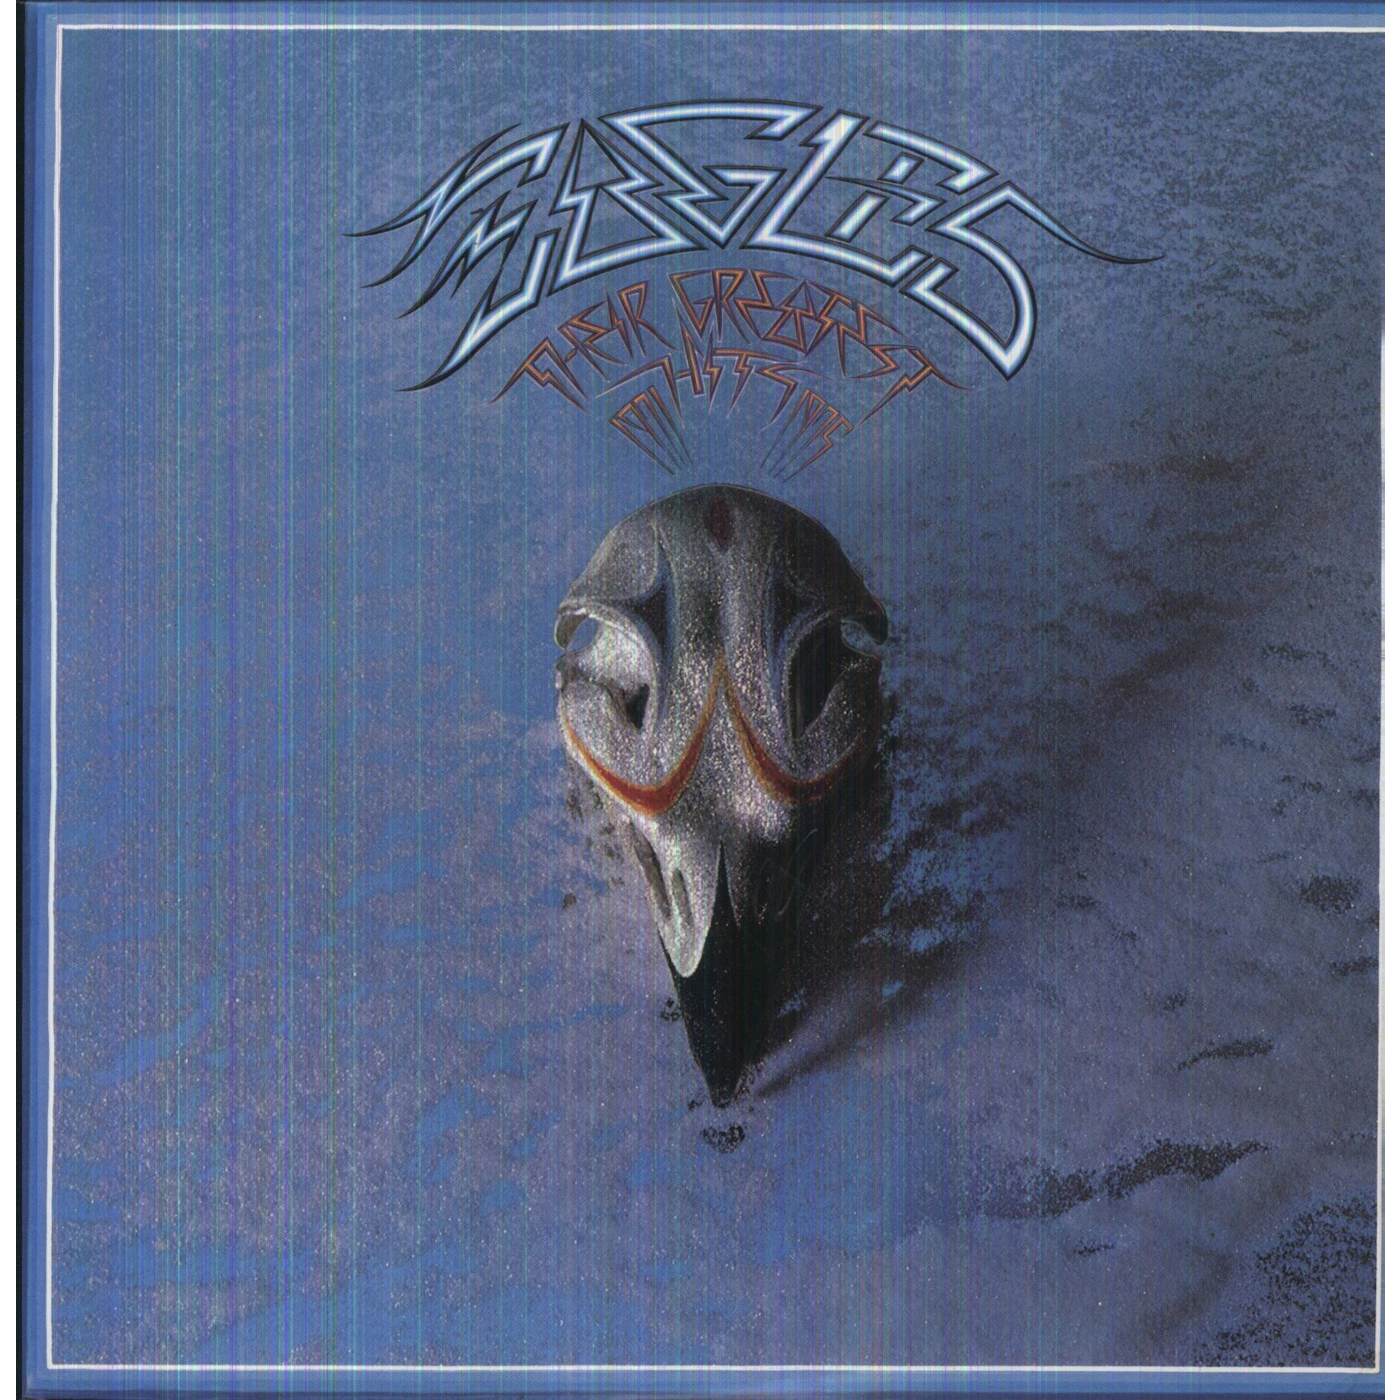 Eagles Their Greatest Hits 1971-1975 Vinyl Record